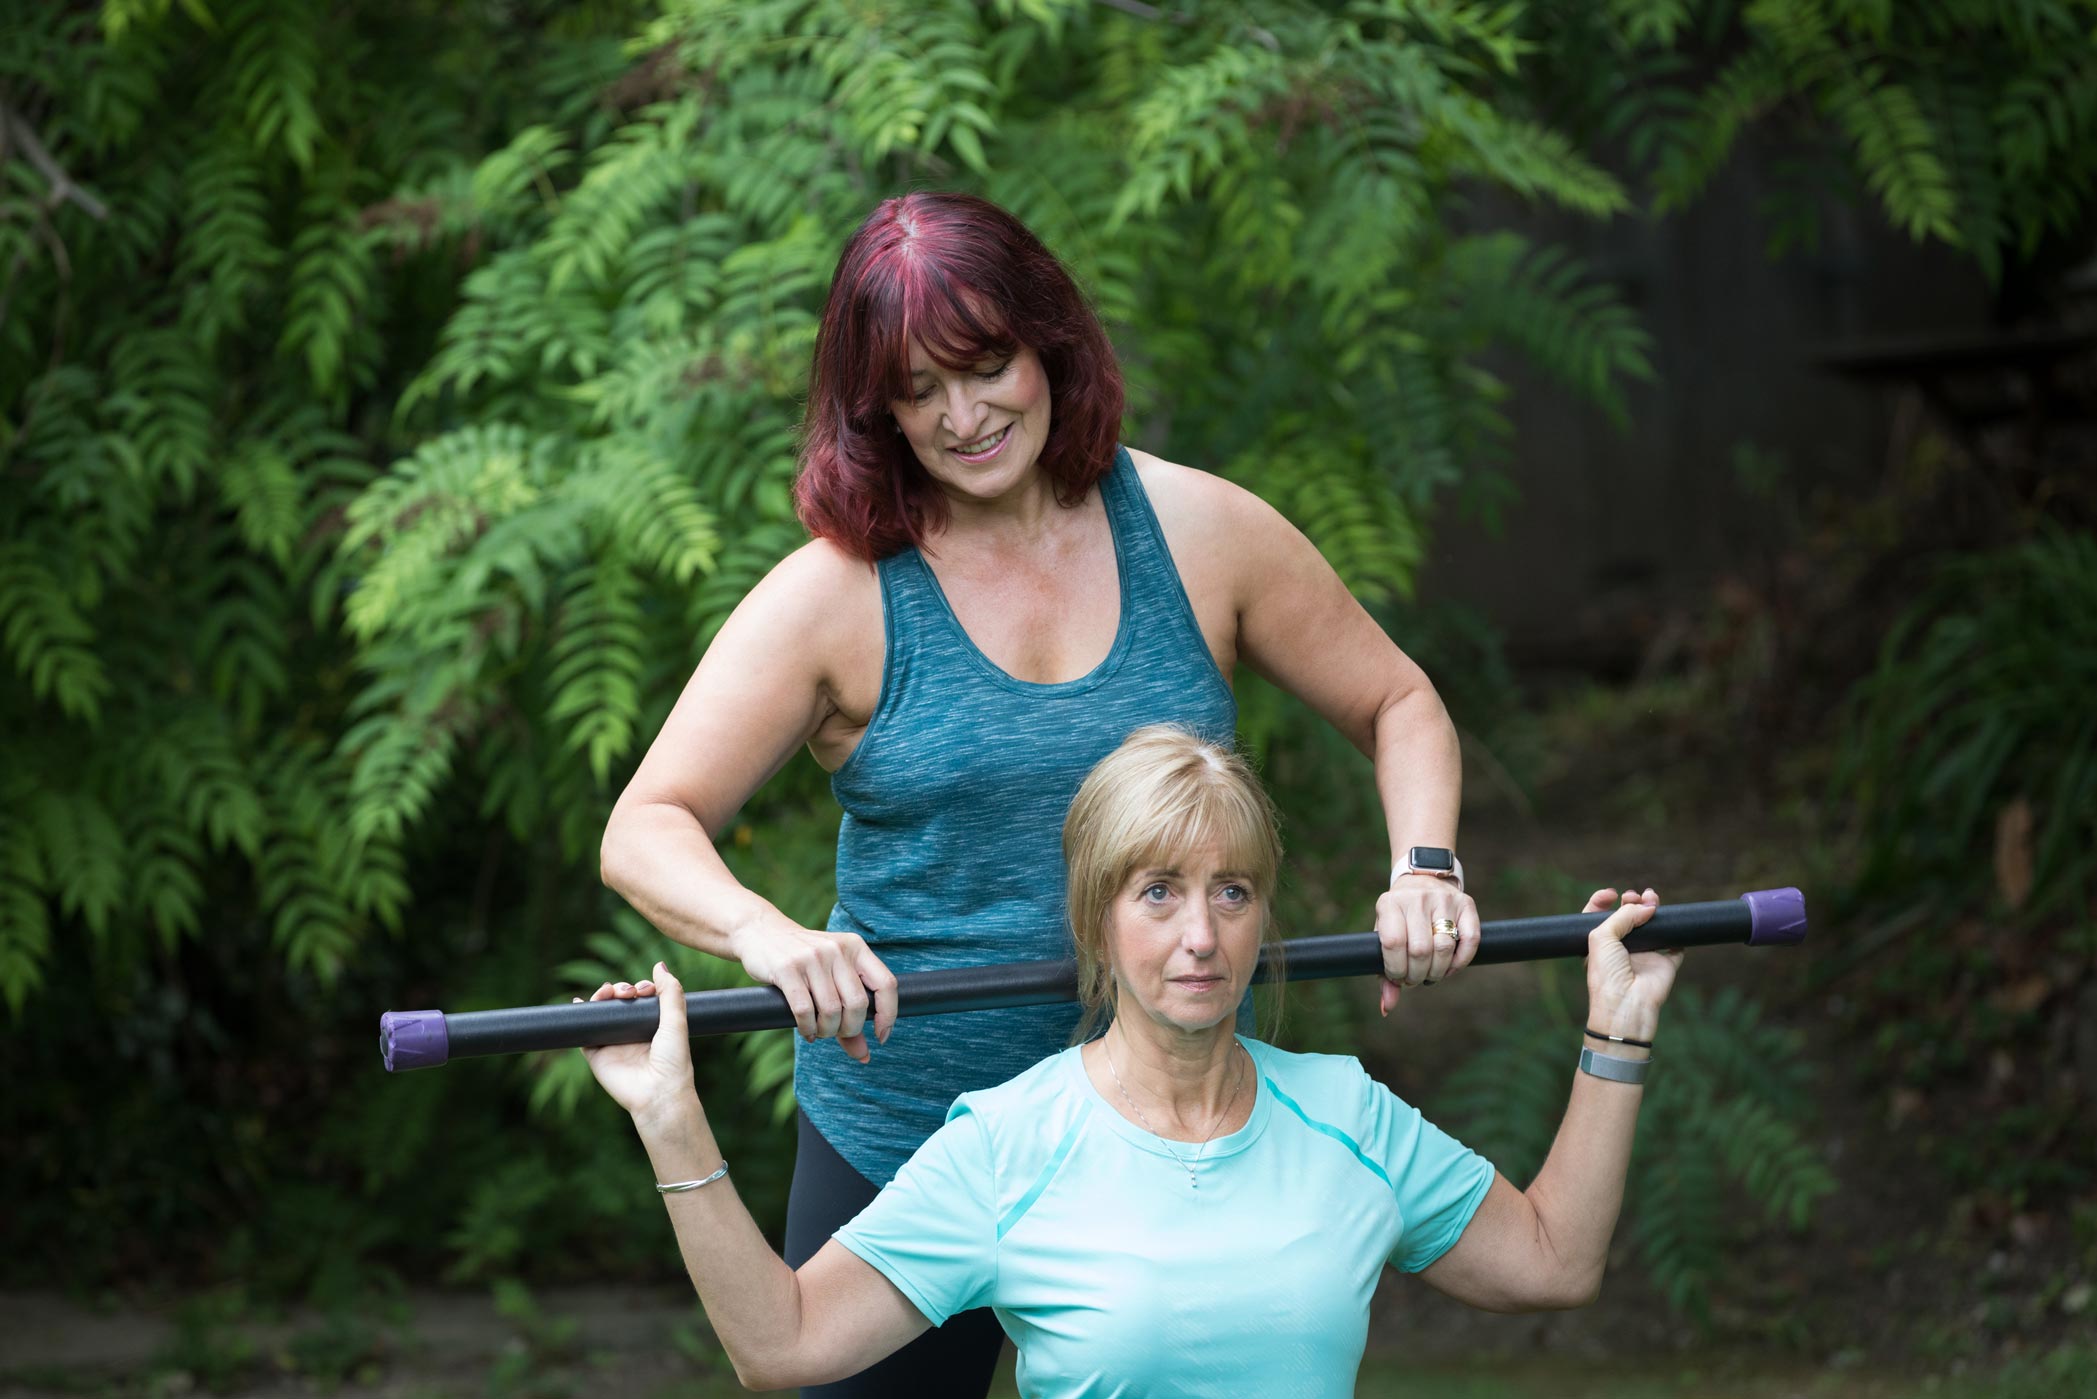 A female personal trainer helps her client as part of her health & fitness personal branding photography shoot in Croydon, London